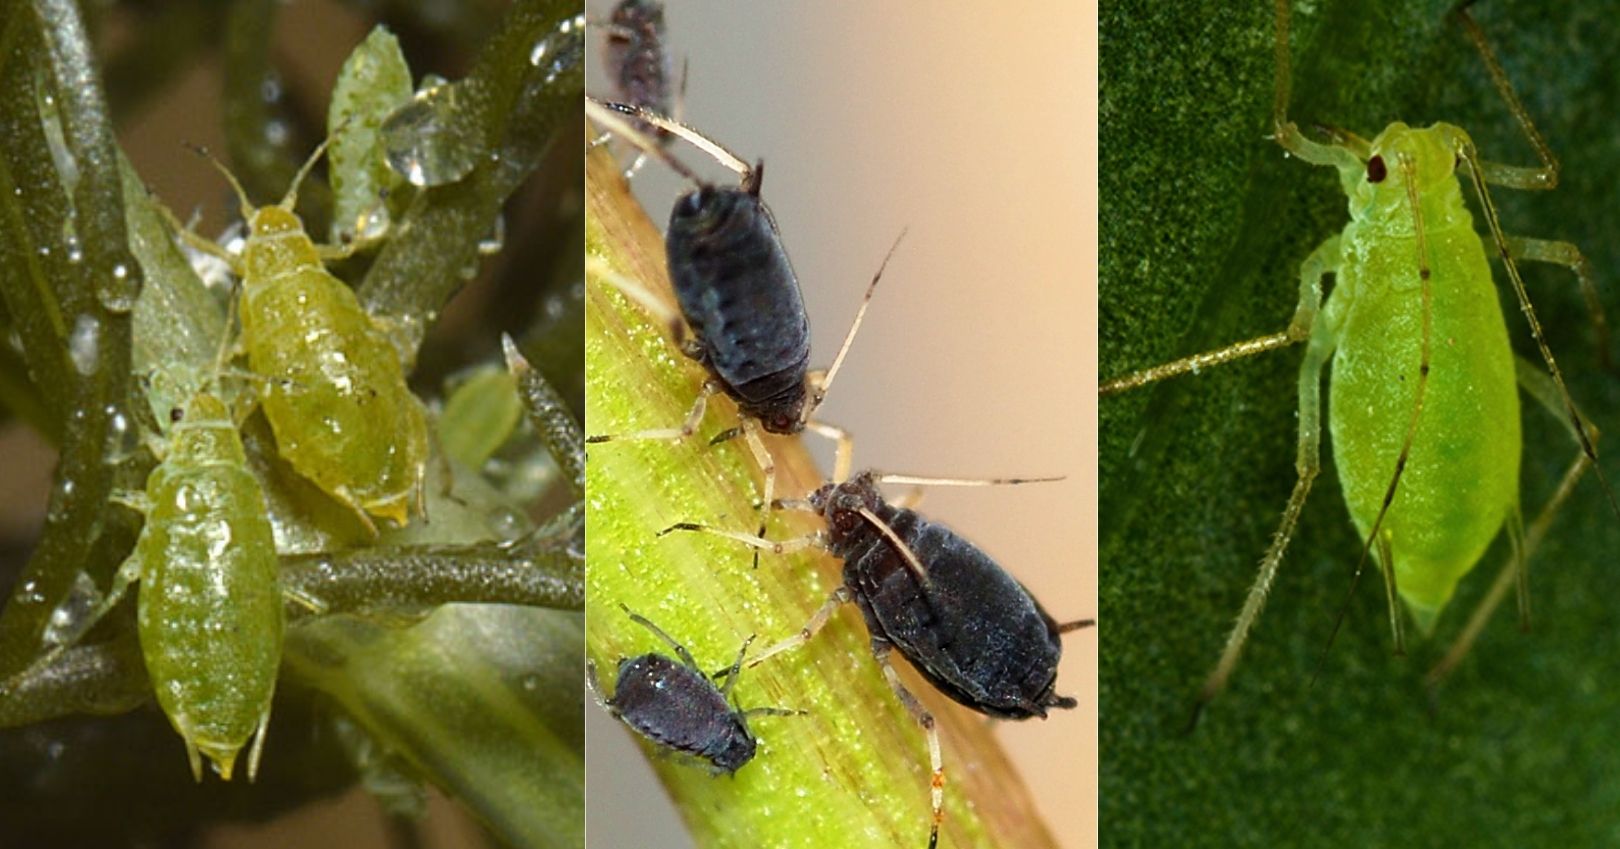 Willow-Carrot Aphid, Bean Aphid, and Green Peach Aphid (David Fenwick, influentialpoints.com)